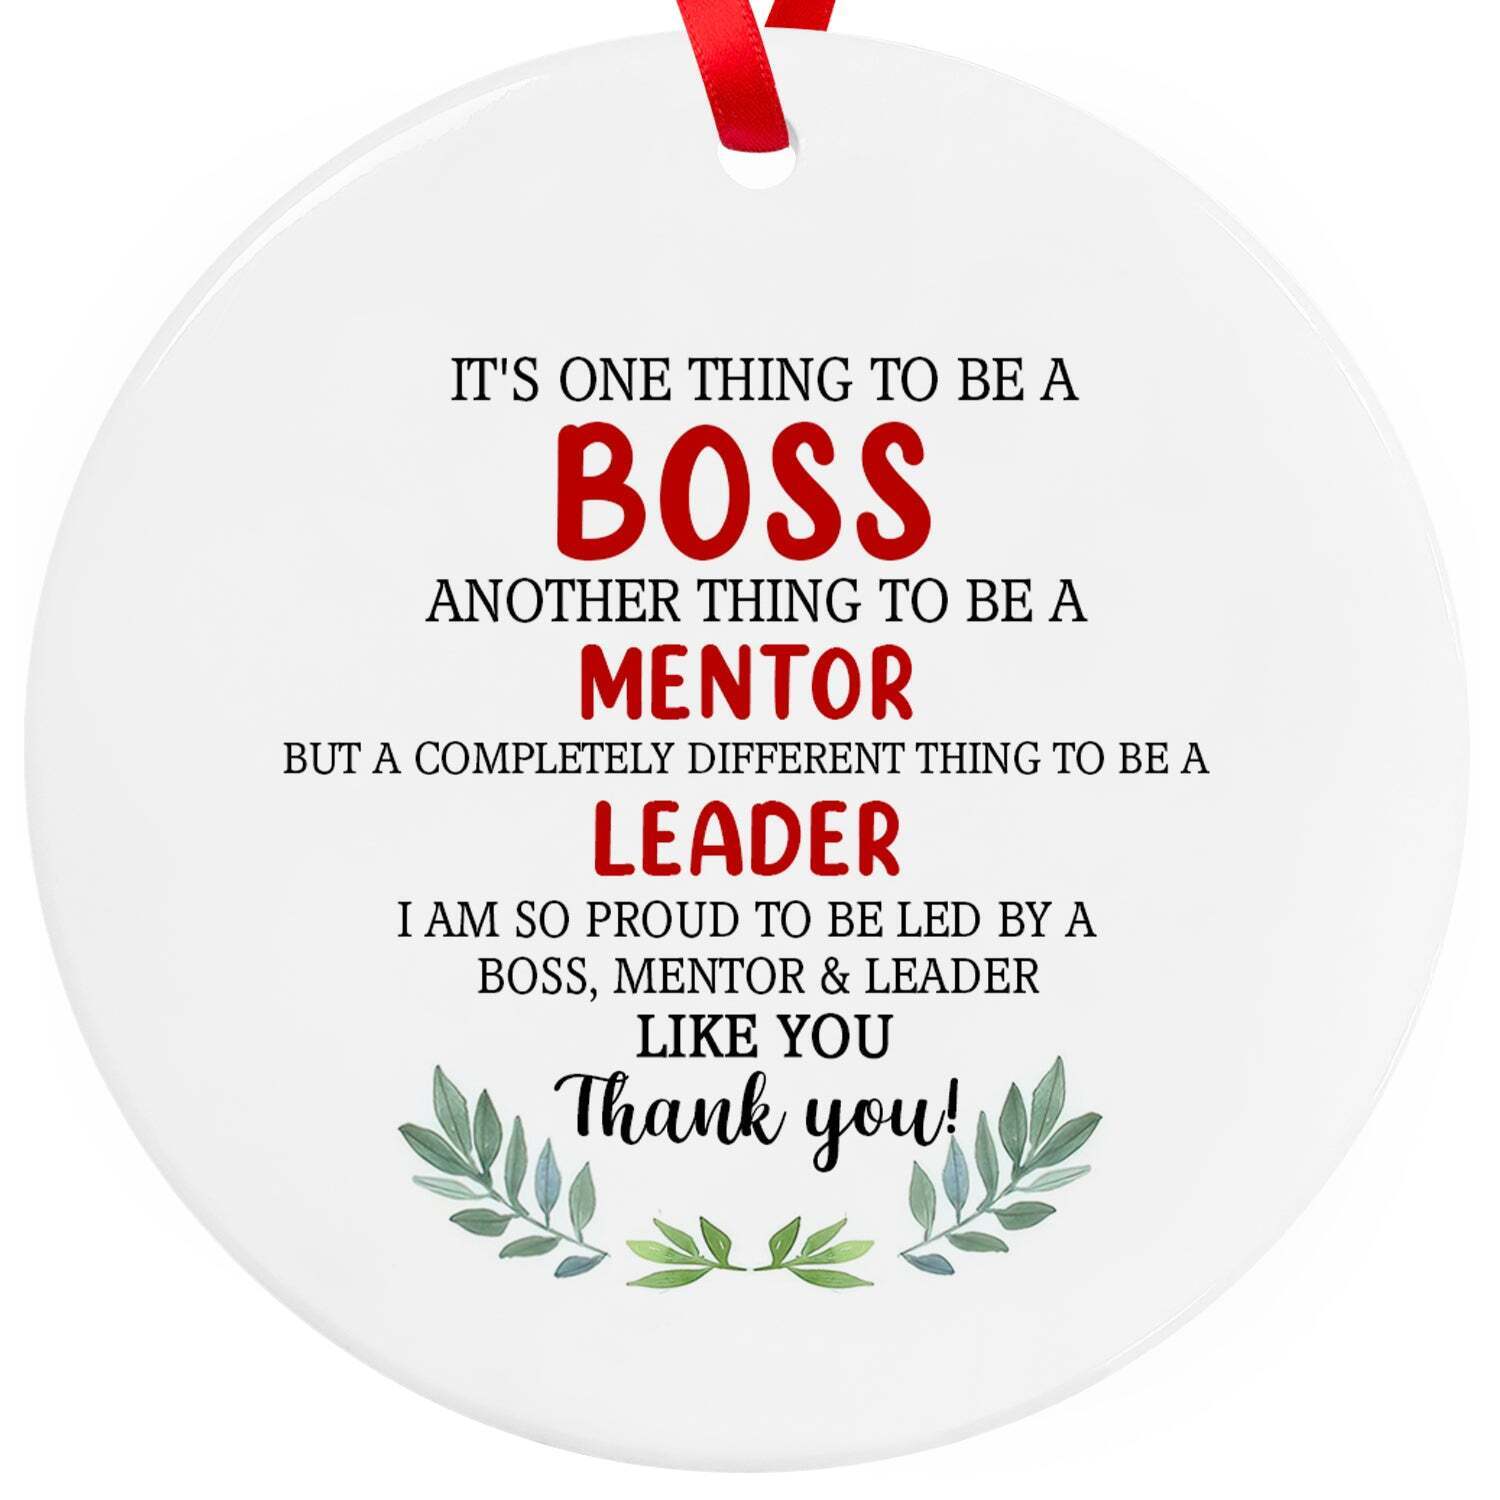 Thank You Boss Gift, Christmas Boss Gifts for Men, Boss Lady Gifts for Women, Ch